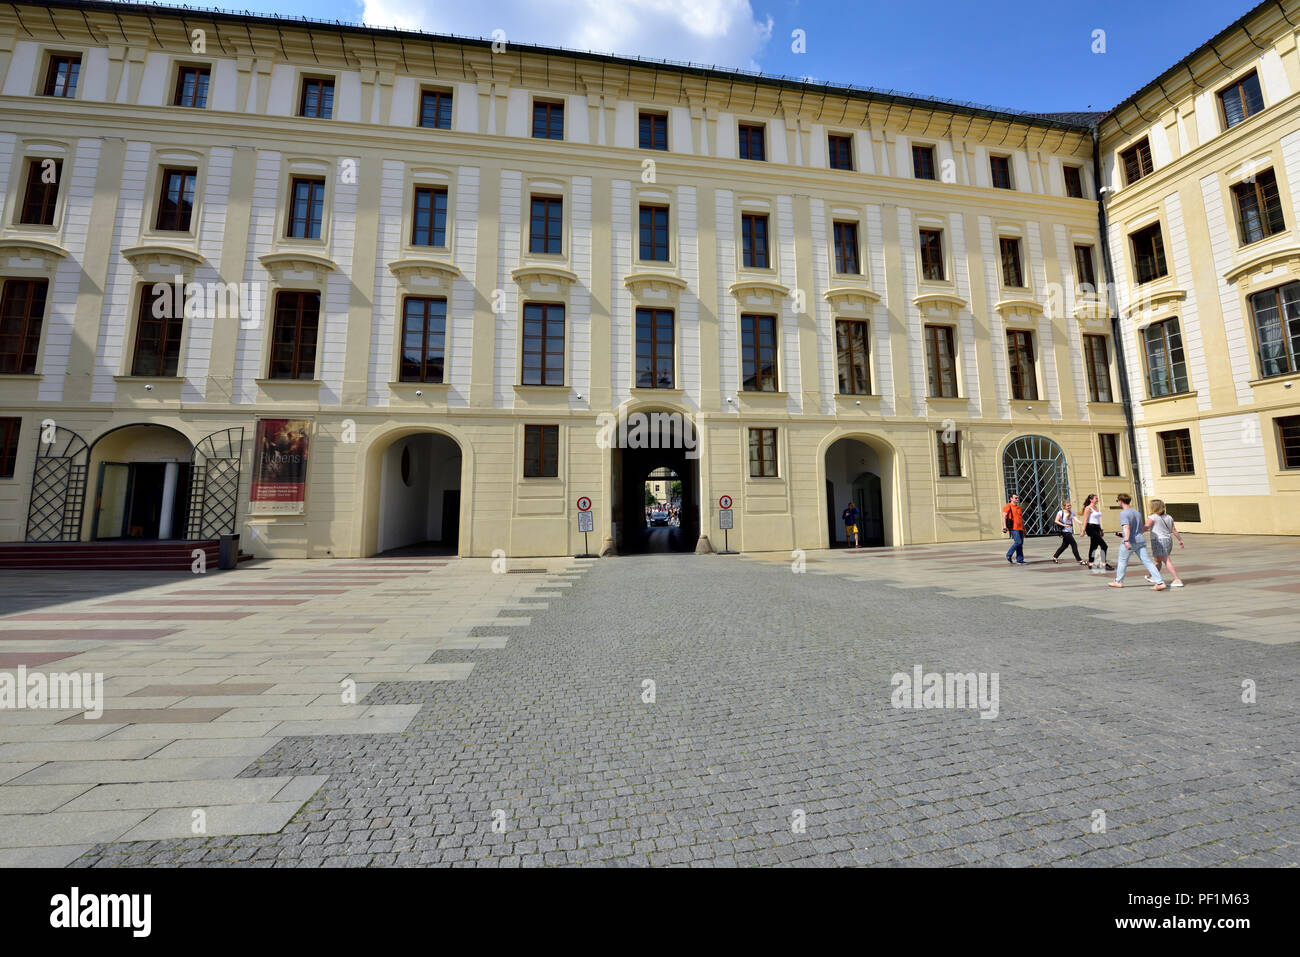 Inside Prague castle dating from the 9th century, 2nd courtyard and federal government offices, Czech Republic Stock Photo